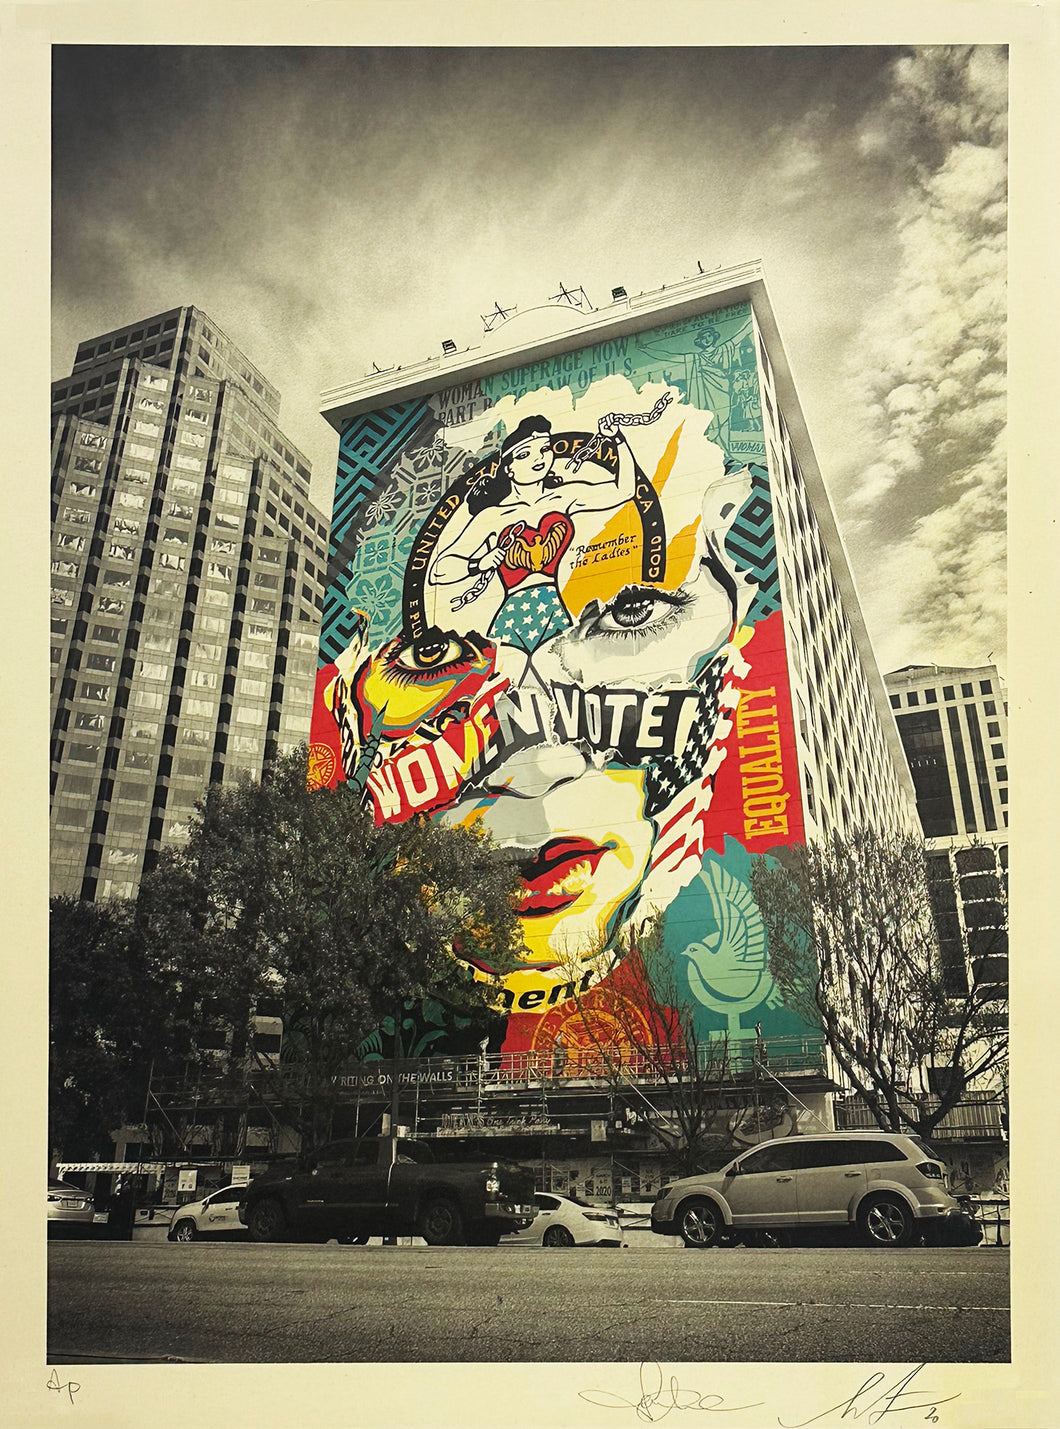 SHEPARD FAIREY x SANDRA CHEVRIER 'The Beauty of Justice & Equality' (2020) Screen Print (AP) - Signari Gallery 